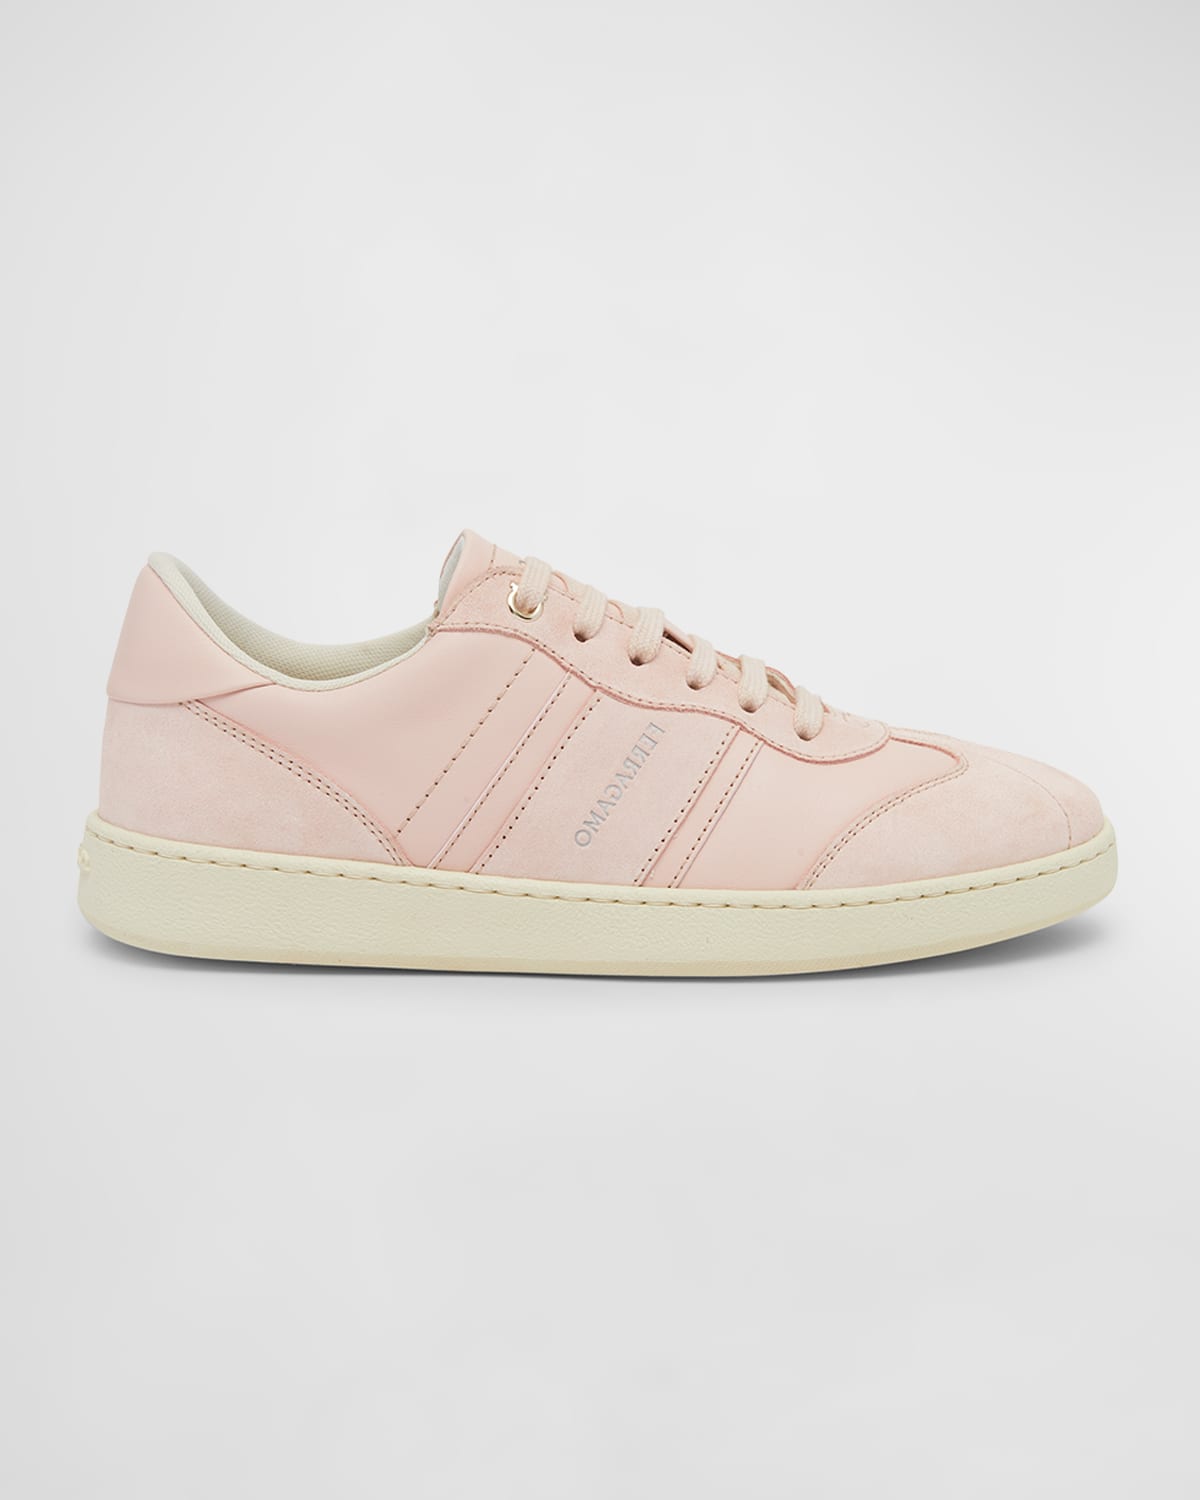 Ferragamo Achilles Mixed Leather Low-top Sneakers In Nylund Pink